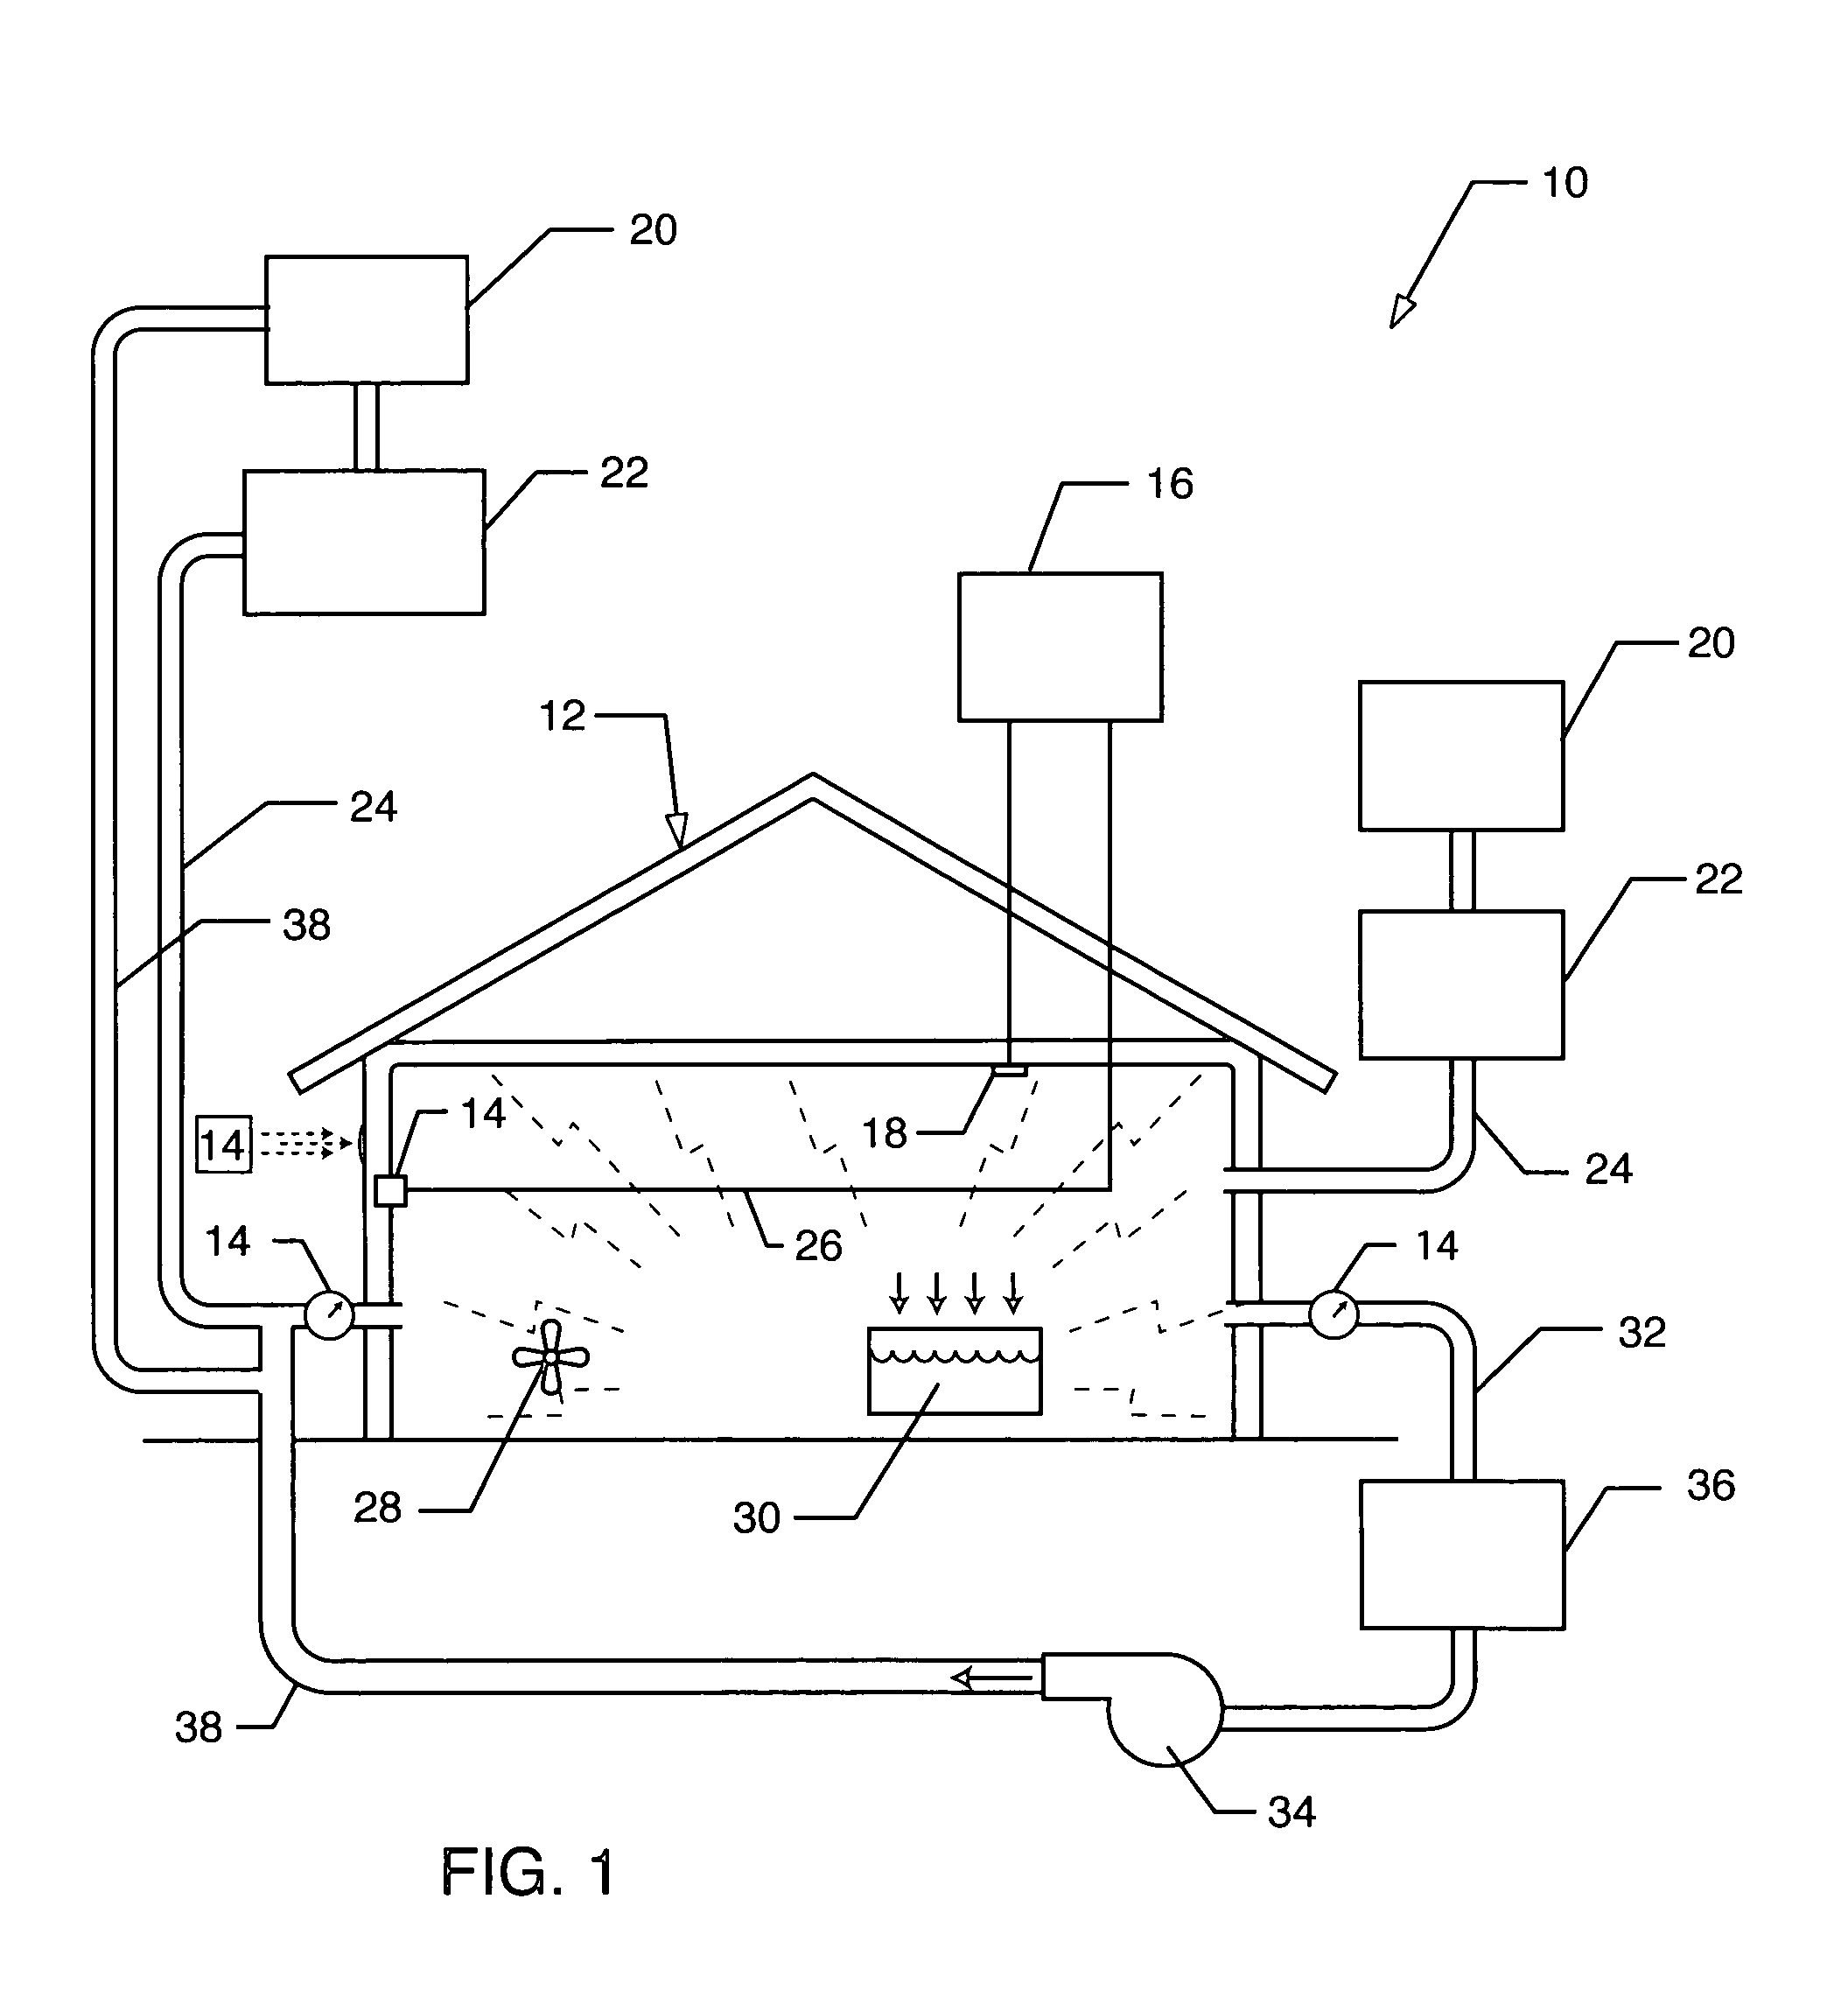 System and process for removing or treating harmful biological and organic substances within structures and enclosures